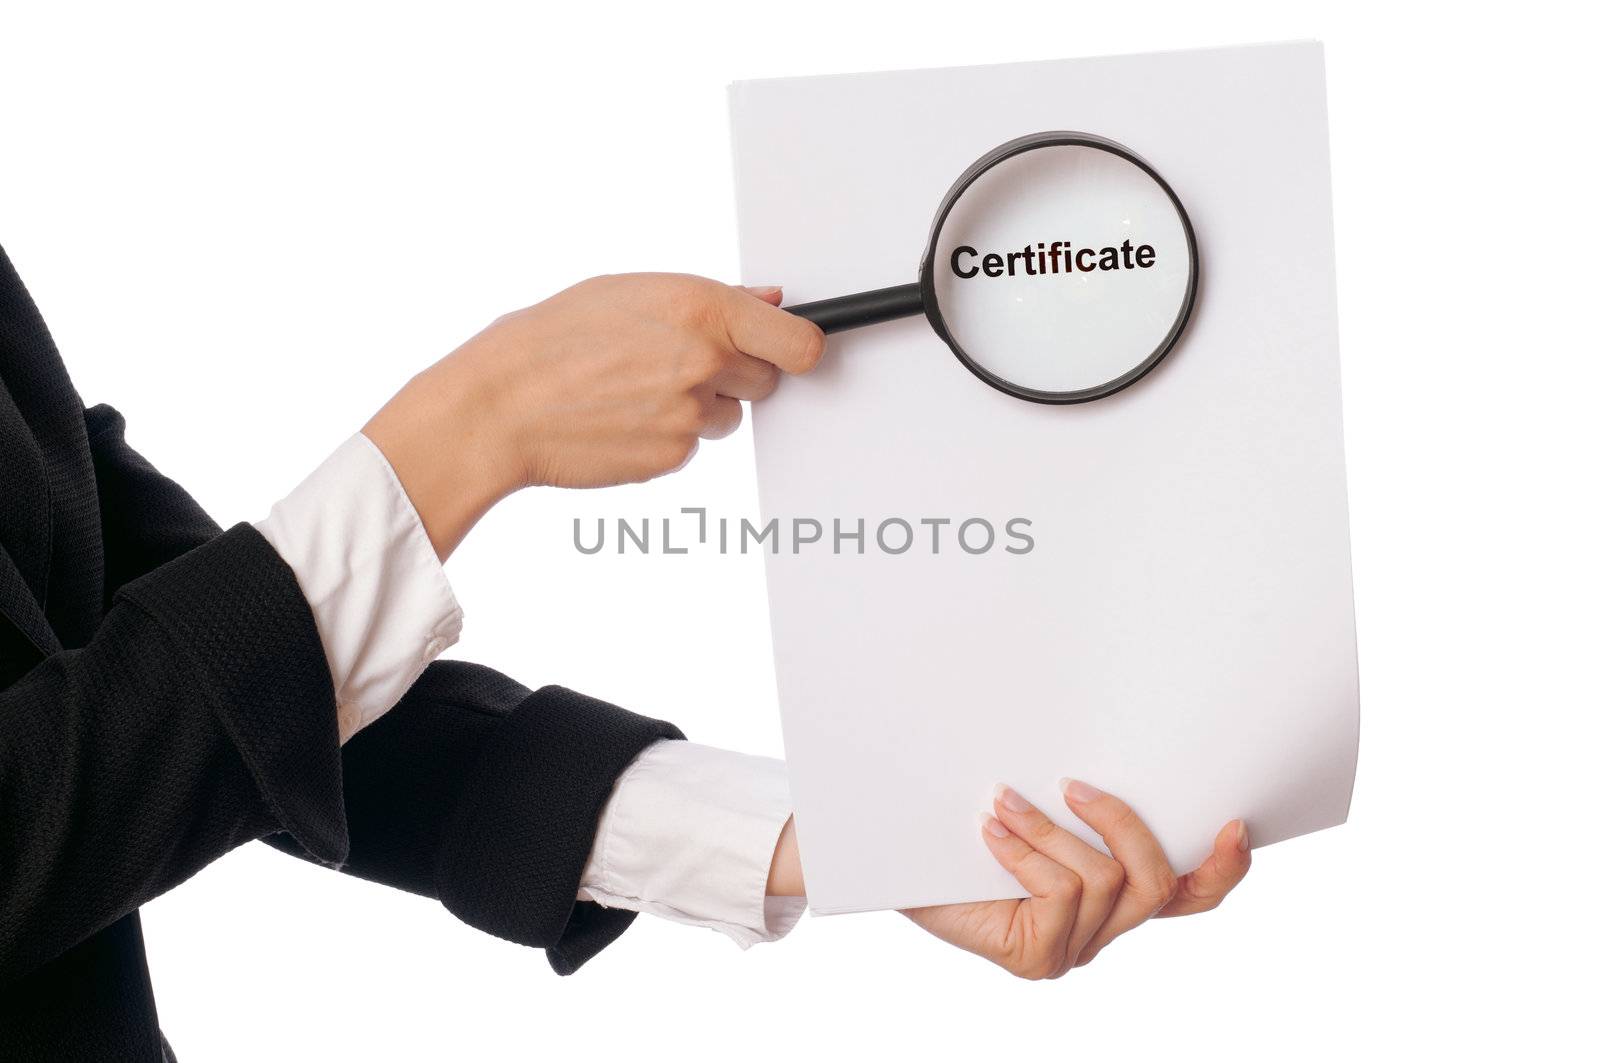 The office worker reviewing a certificate of new workers